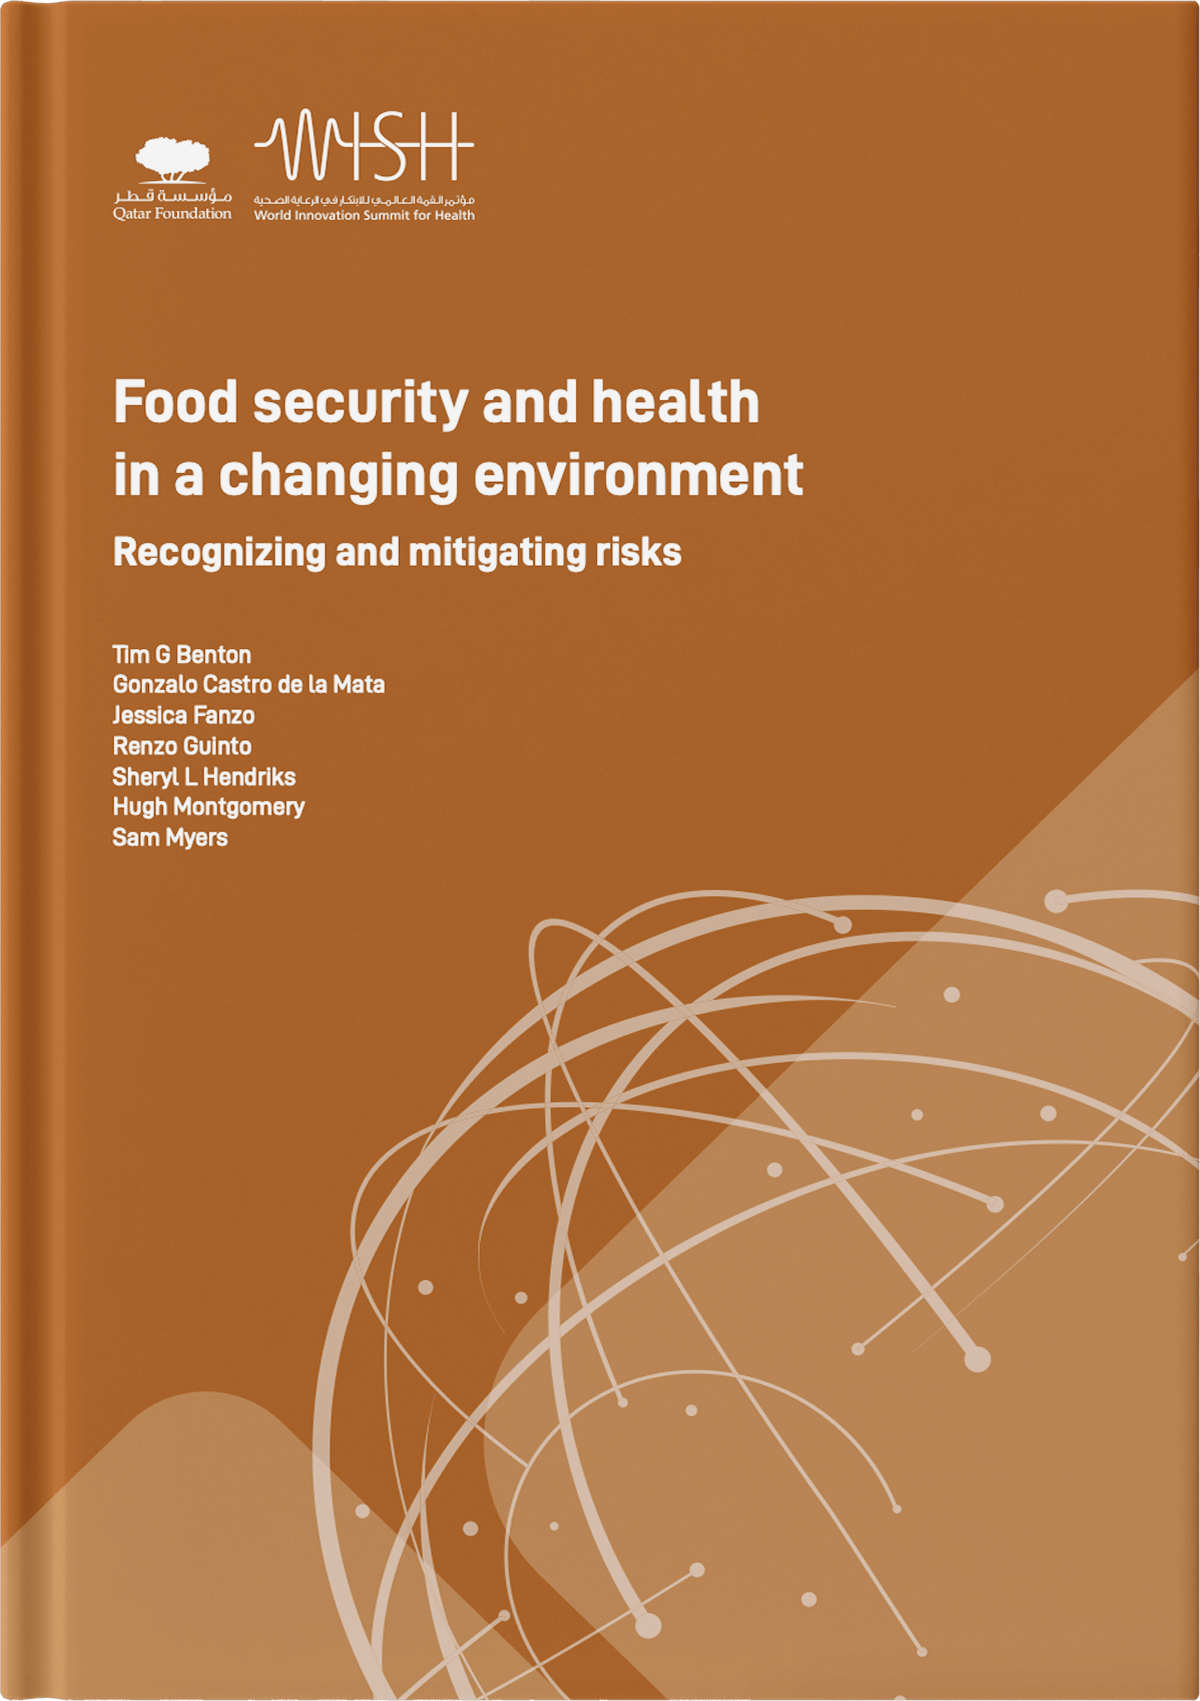 Food security and health in a changing environment